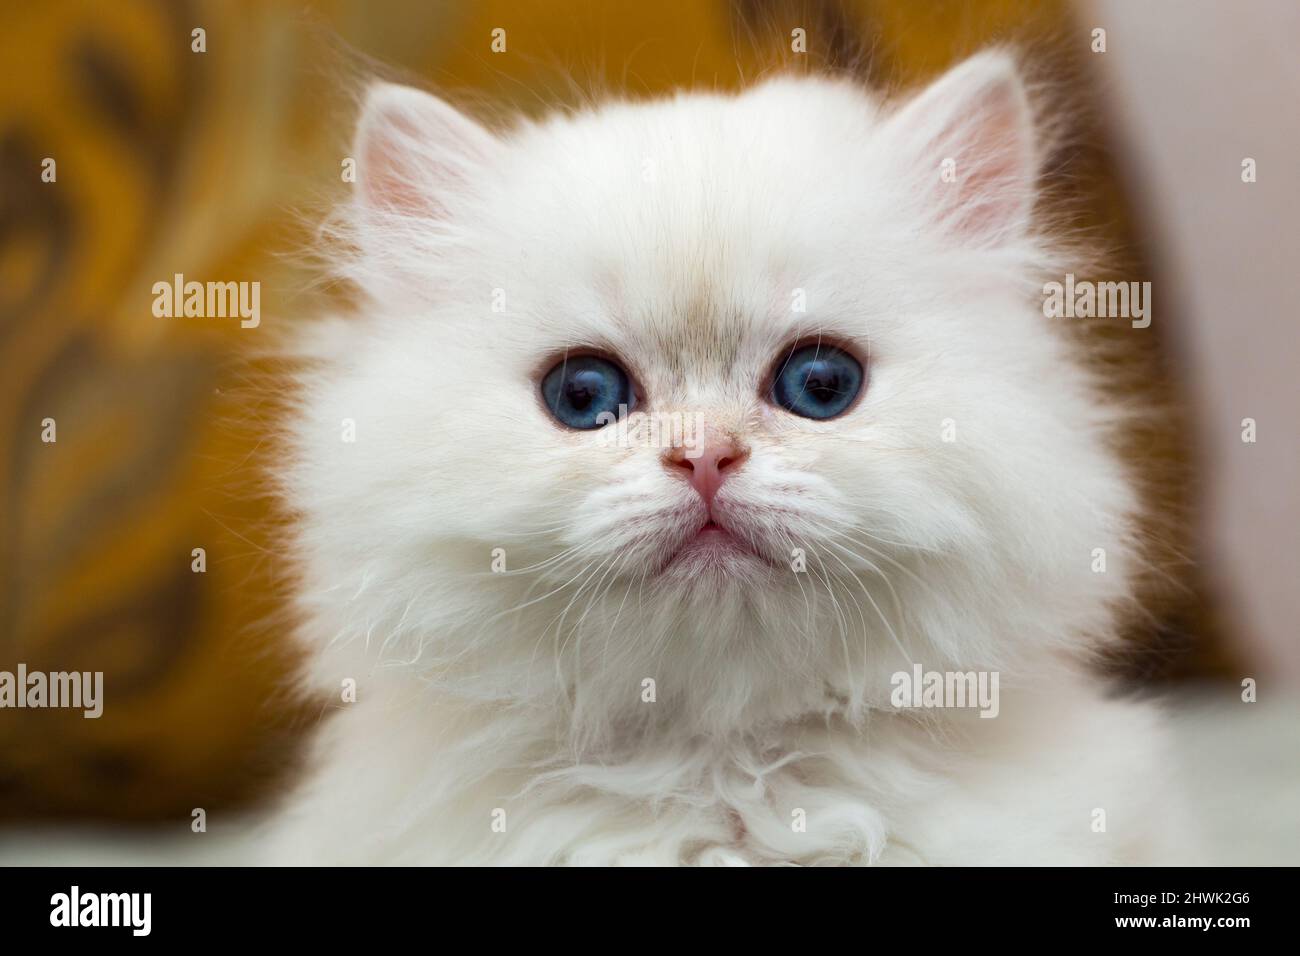 Portrait of a cute fluffy white British long-haired kitten, head of a white kitten close-up Stock Photo